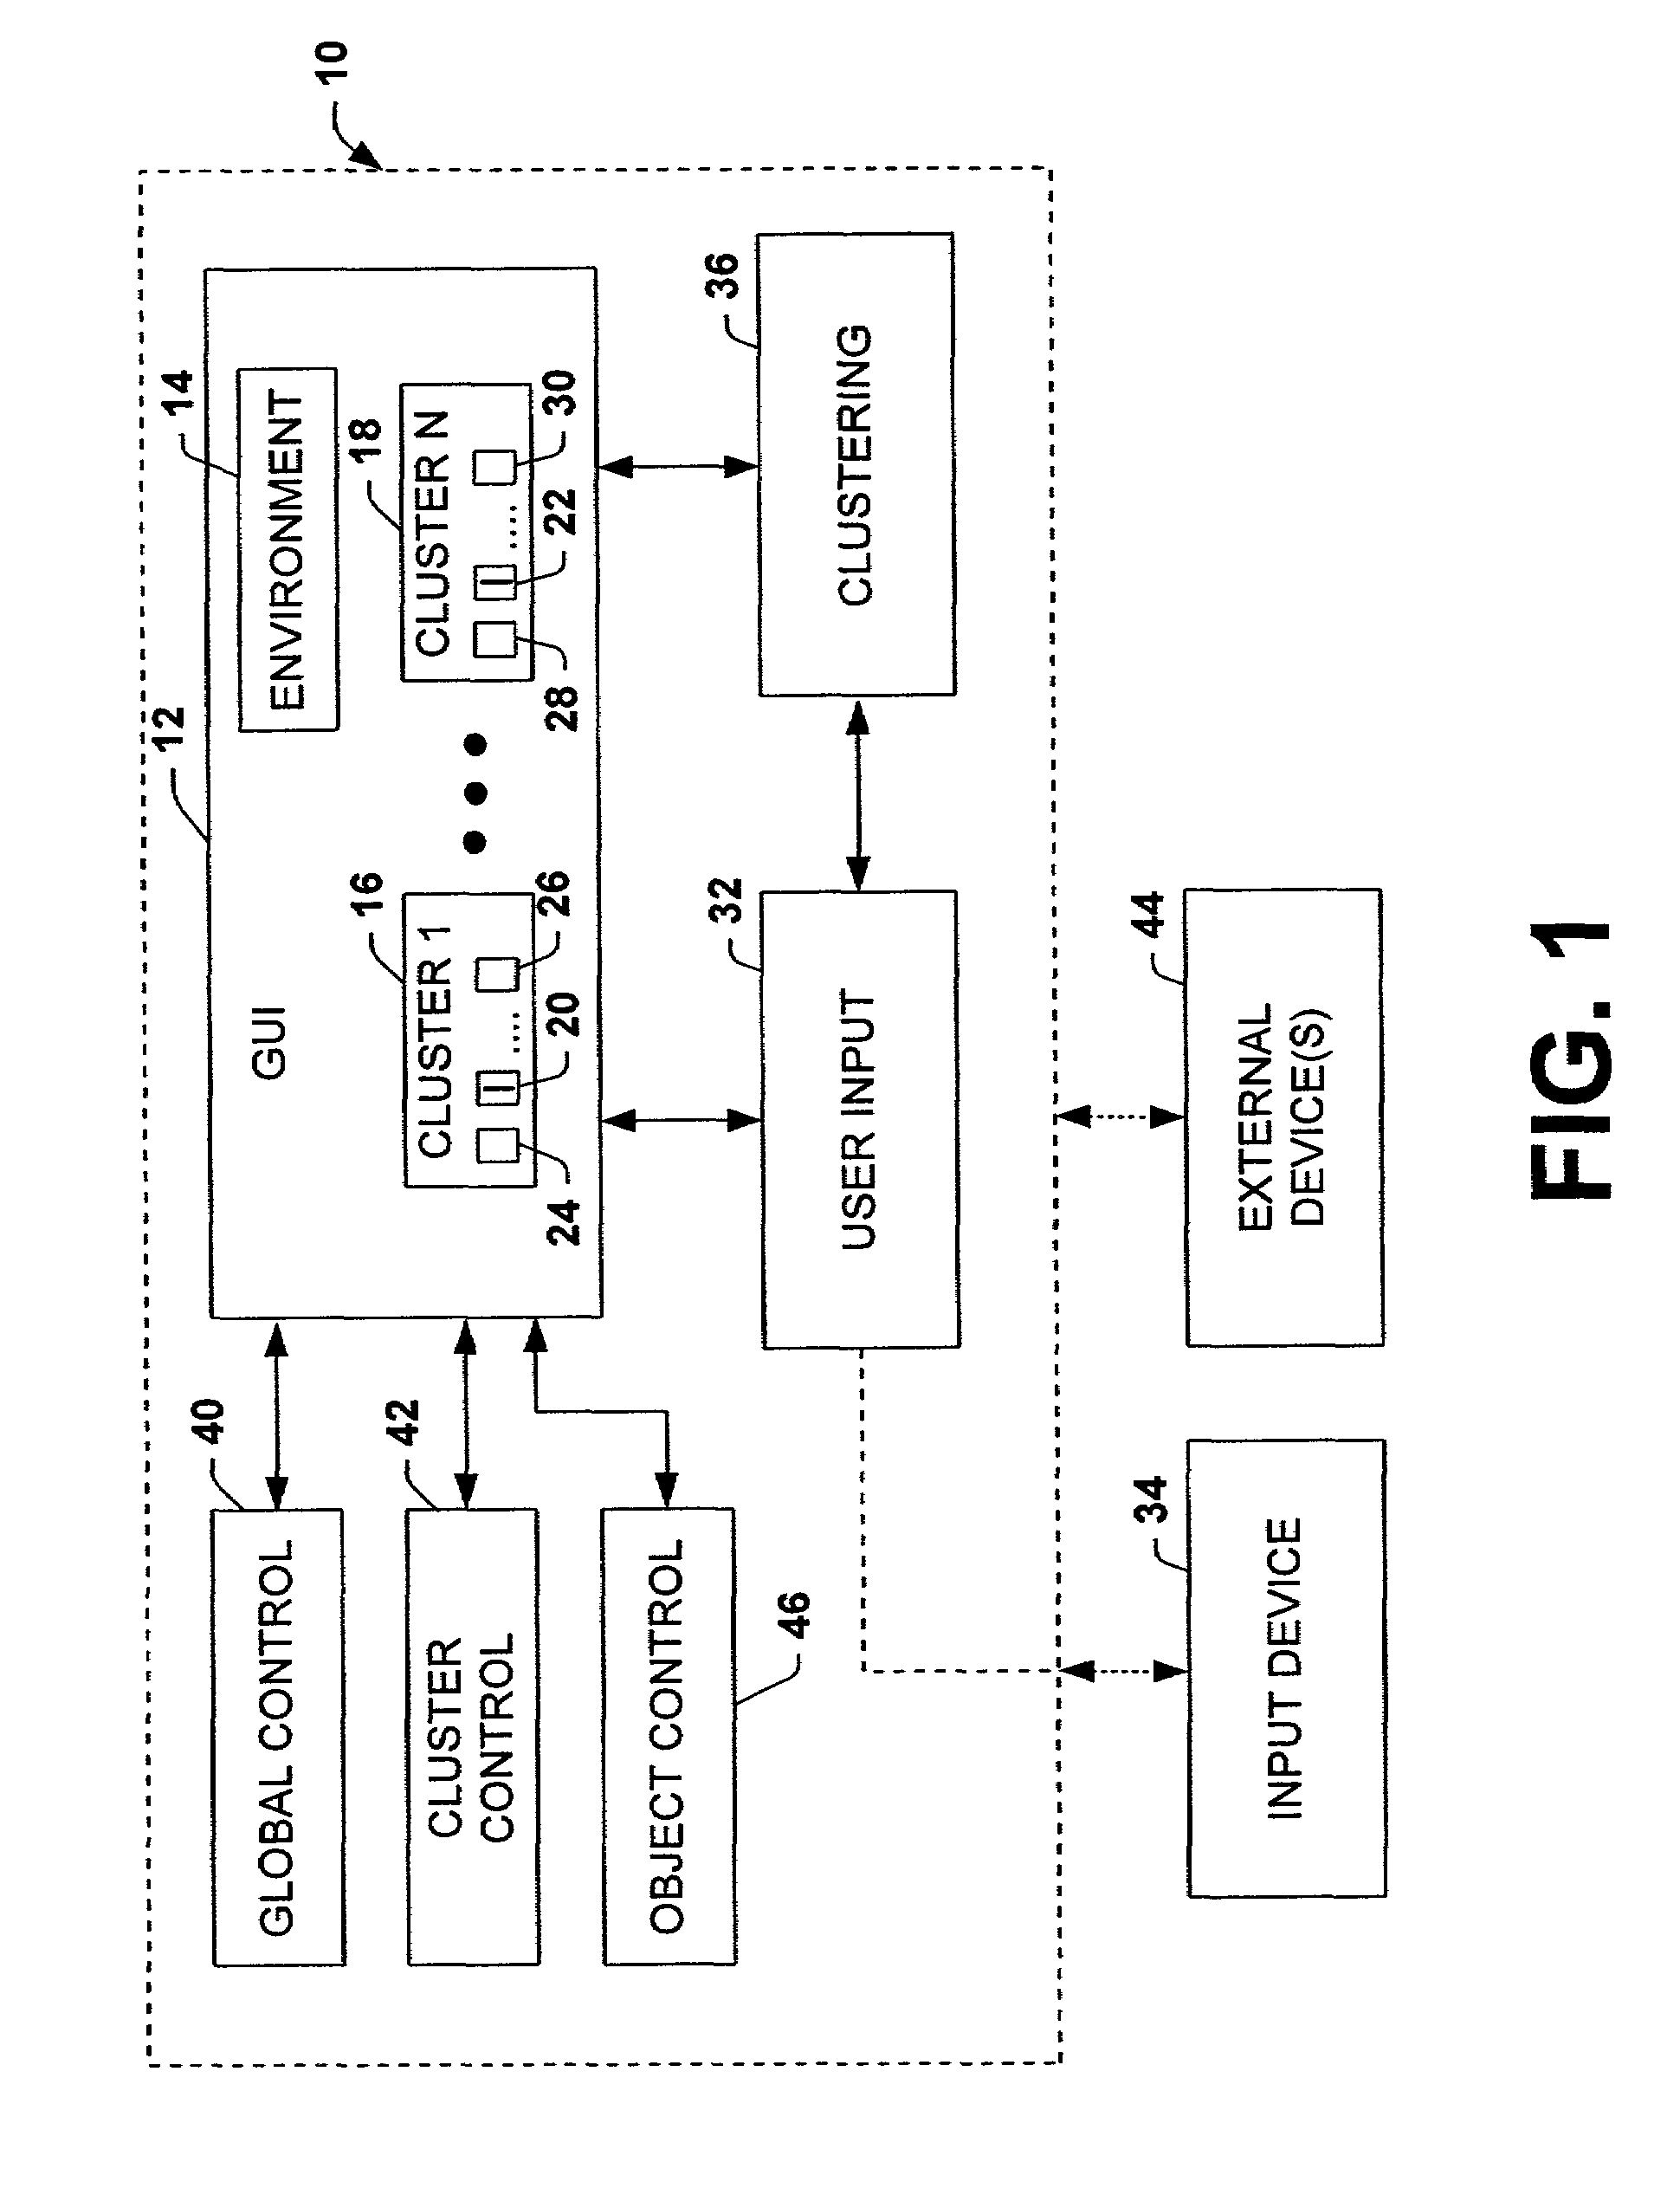 Graphical user interface, data structure and associated method for cluster-based document management